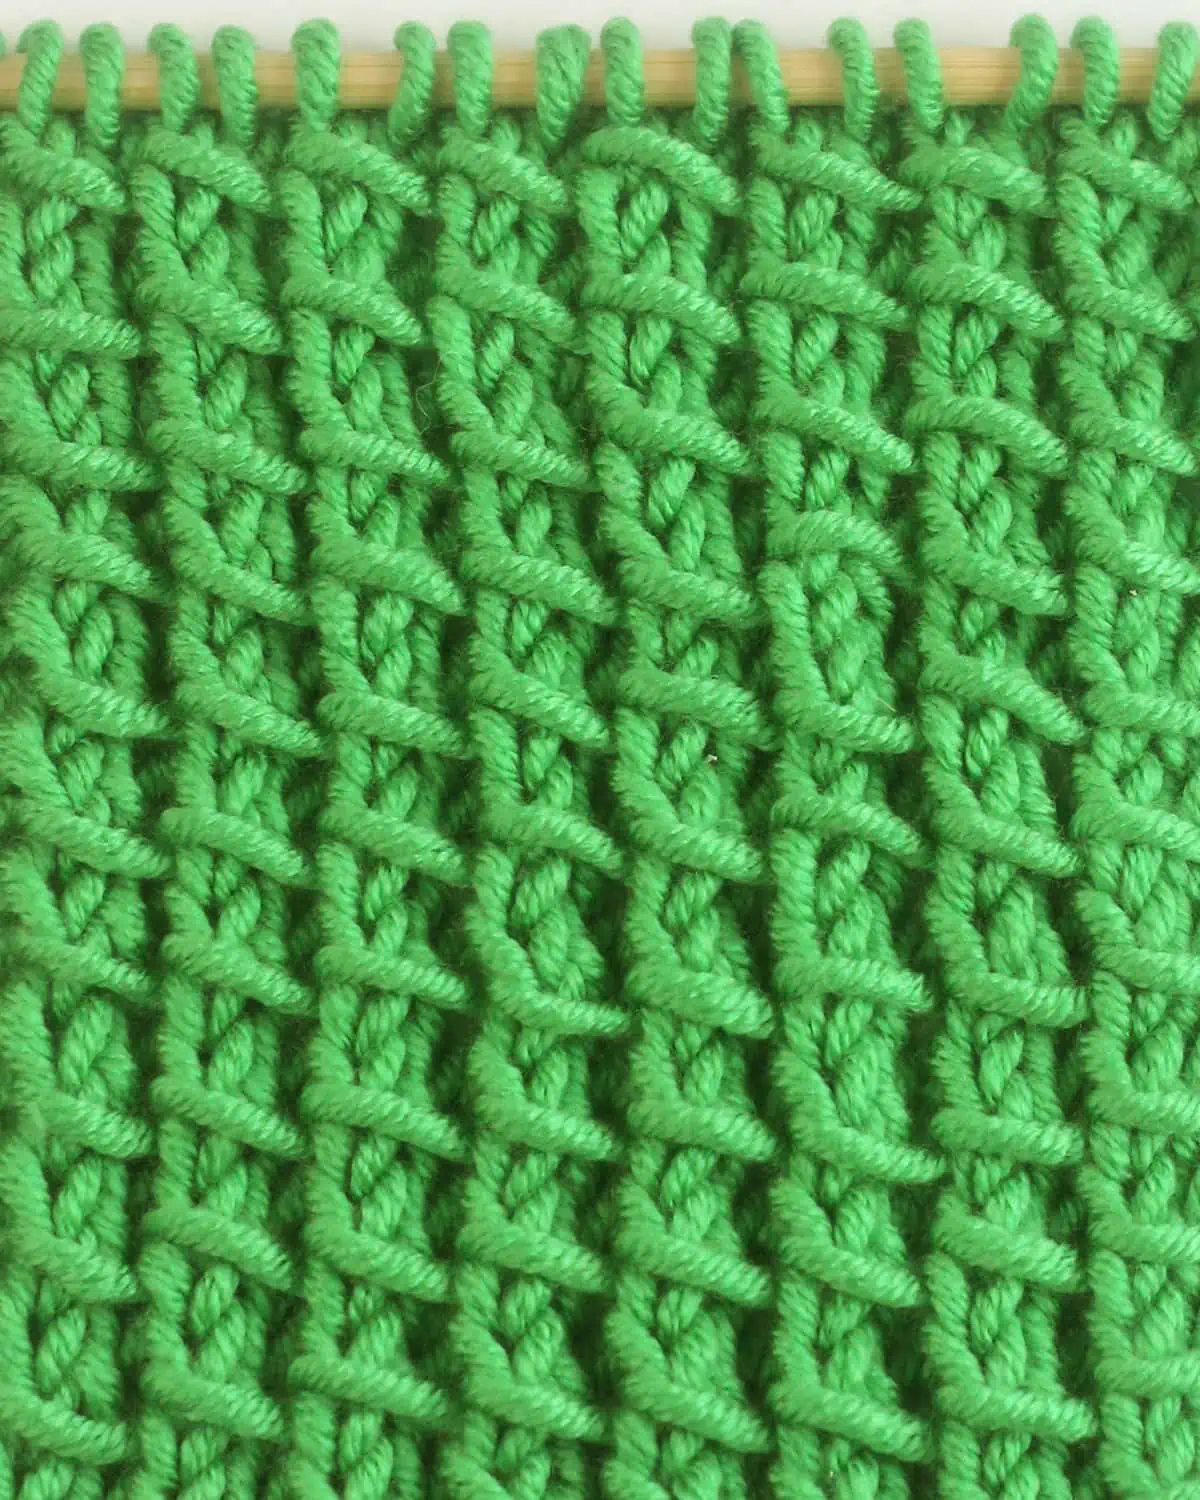 Bamboo Stitch texture knitted with green colored yarn on wooden needle.